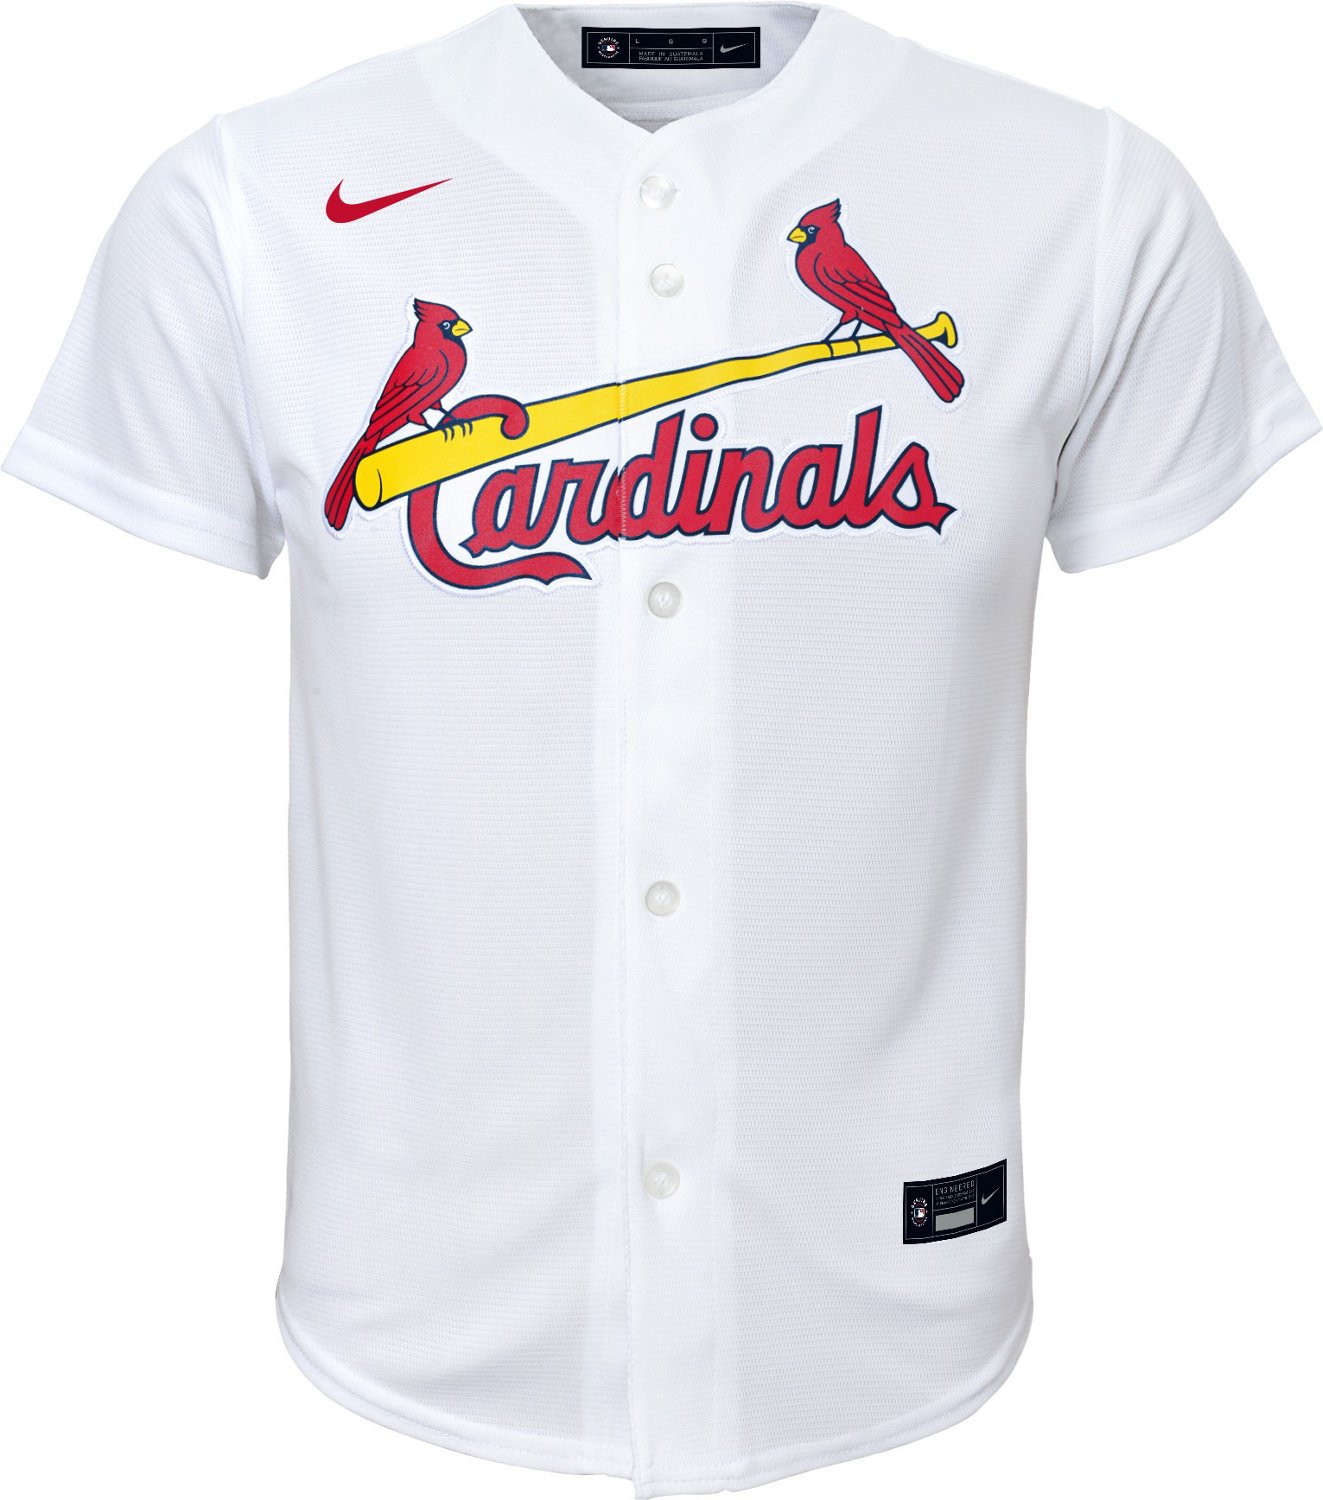 Nike Youth St Louis Cardinals 1 Button Jersey Medium M MLB Boys Cards